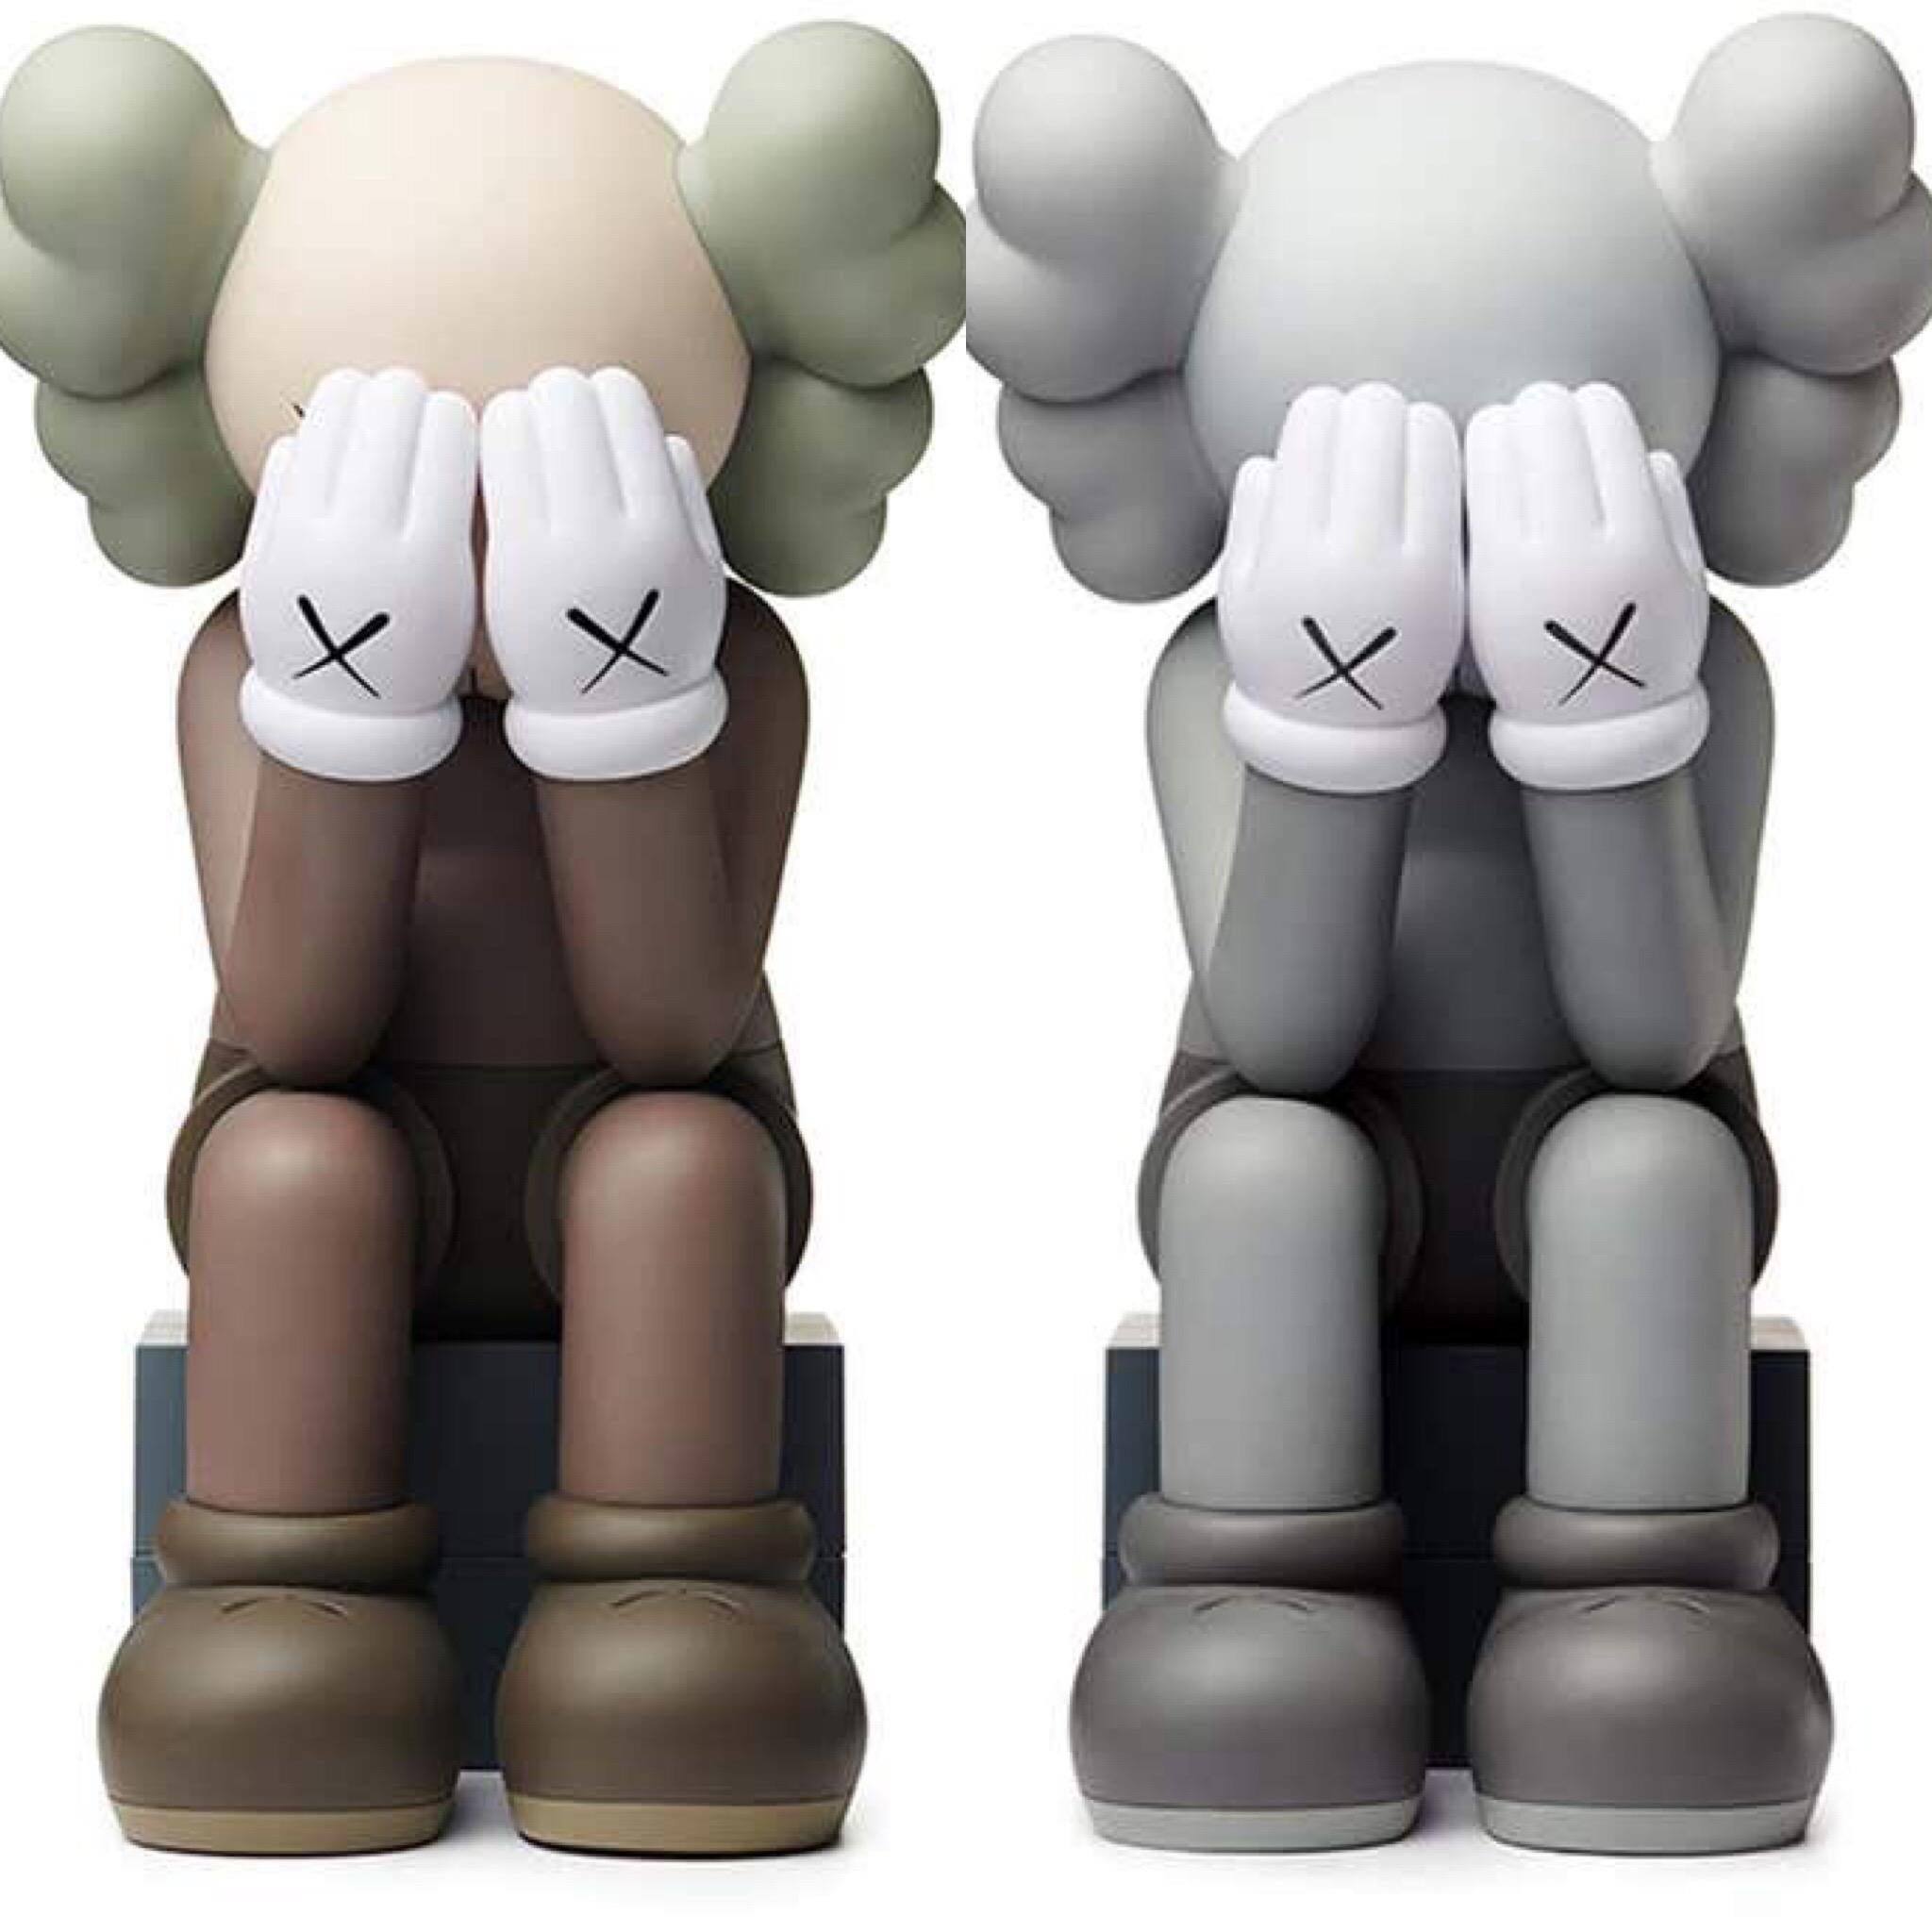 KAWS Companion Passing Through Complete Set of 2 (2018):
The most iconic of the KAWS Companions presented in 2 color-ways: Brown & Grey. Published by KAWS One, these figurines have since sold out. 

Medium: Vinyl, Cast Resin
Dimensions (applies to